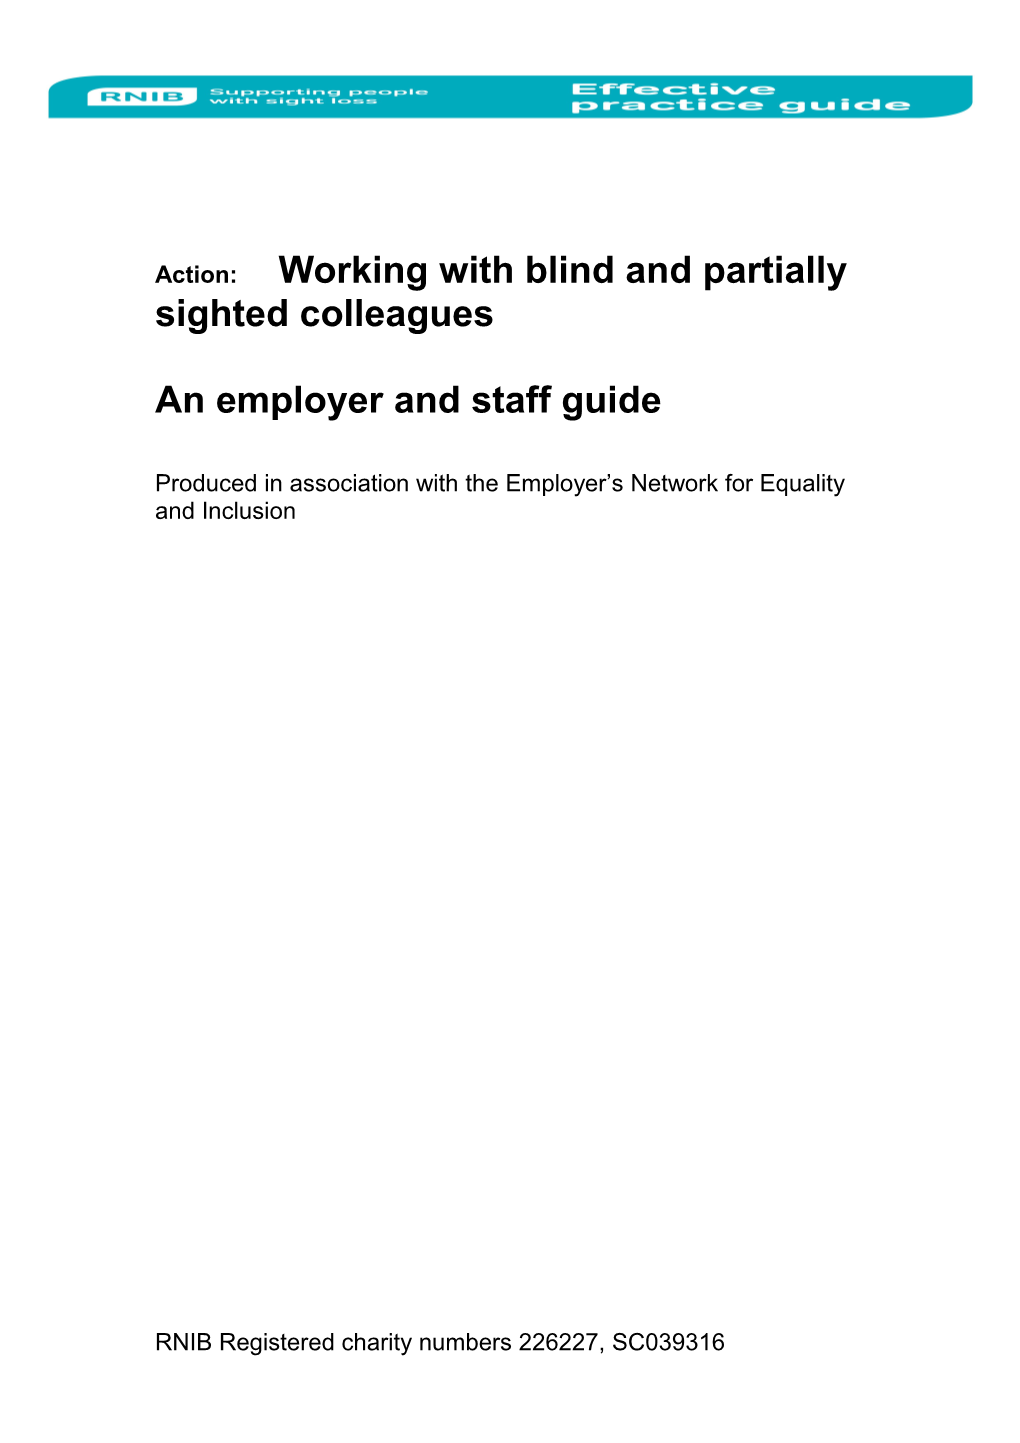 Working with Blind and Partially Sighted Colleaguesan Employer and Staff Guide